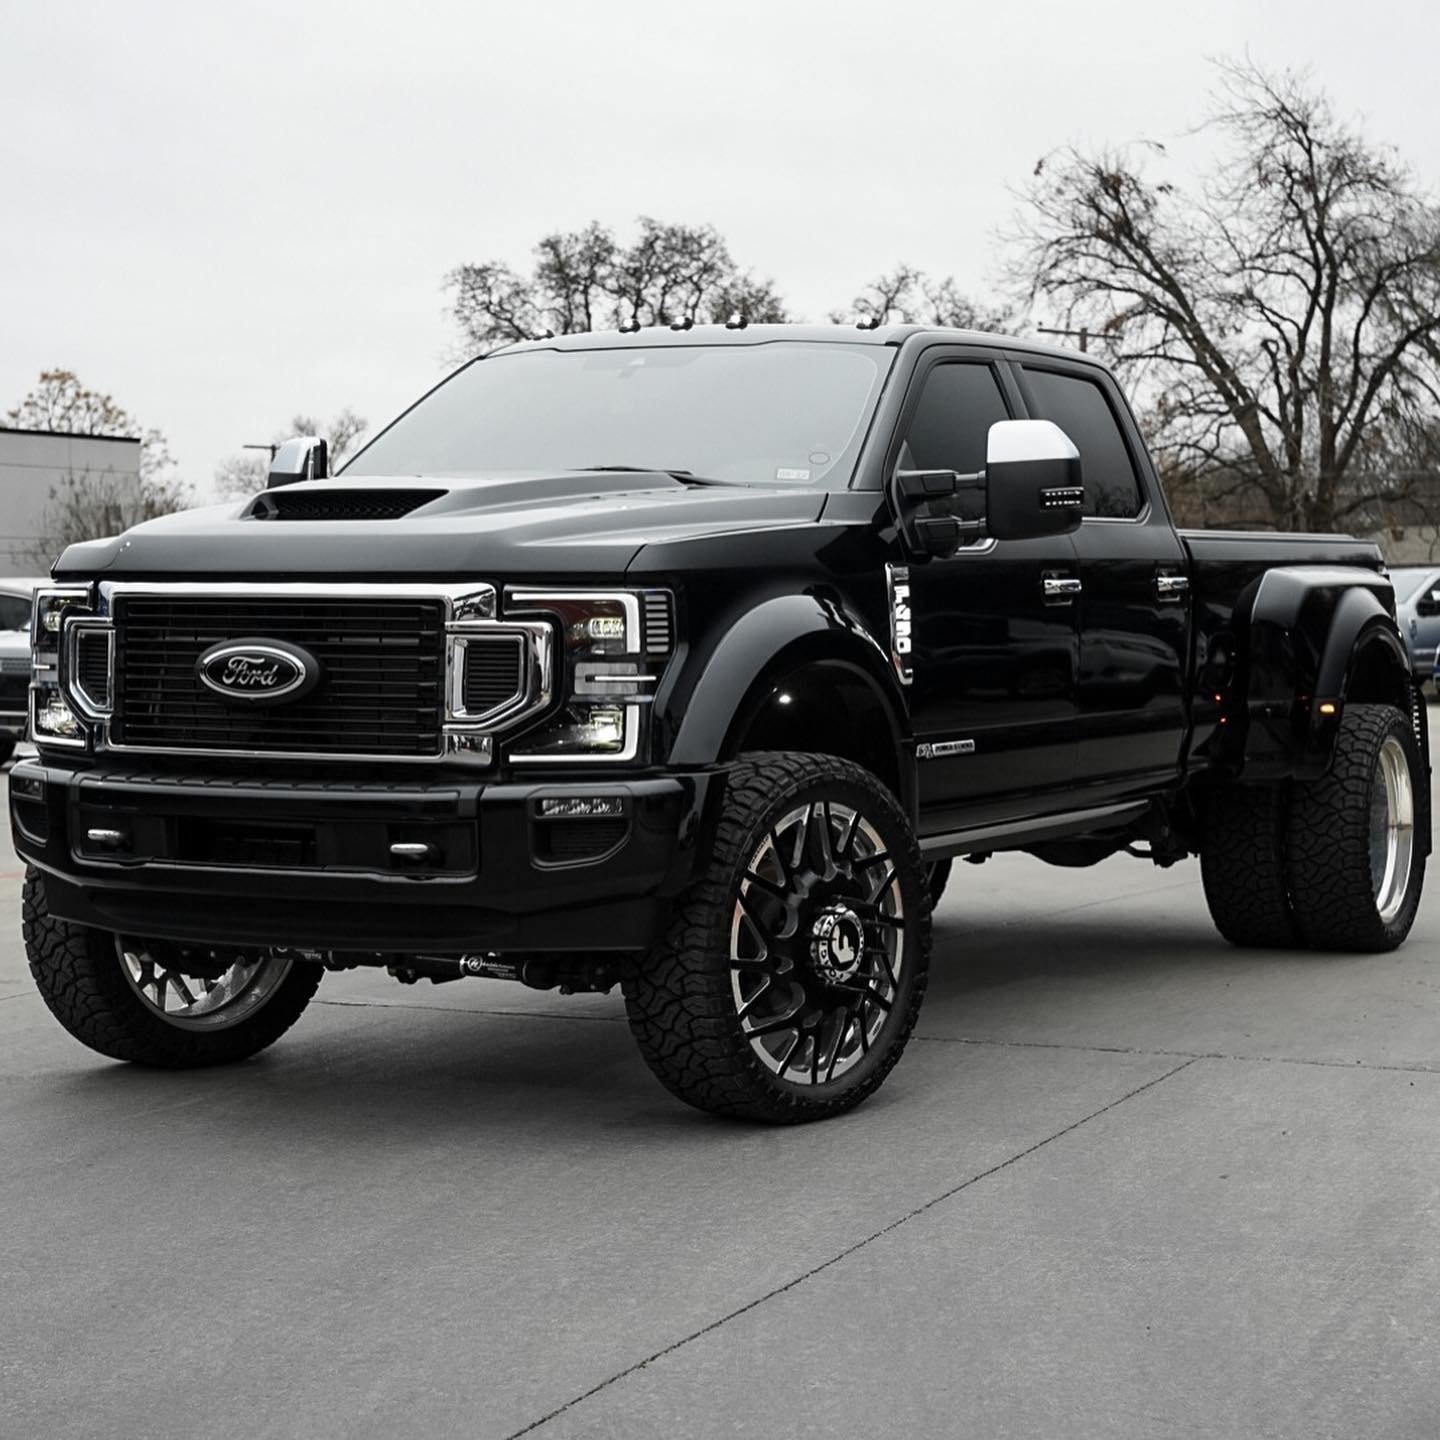 Pitch Black, Lifted Ford F450 Dually on Spiked 26s Is Not Your Average